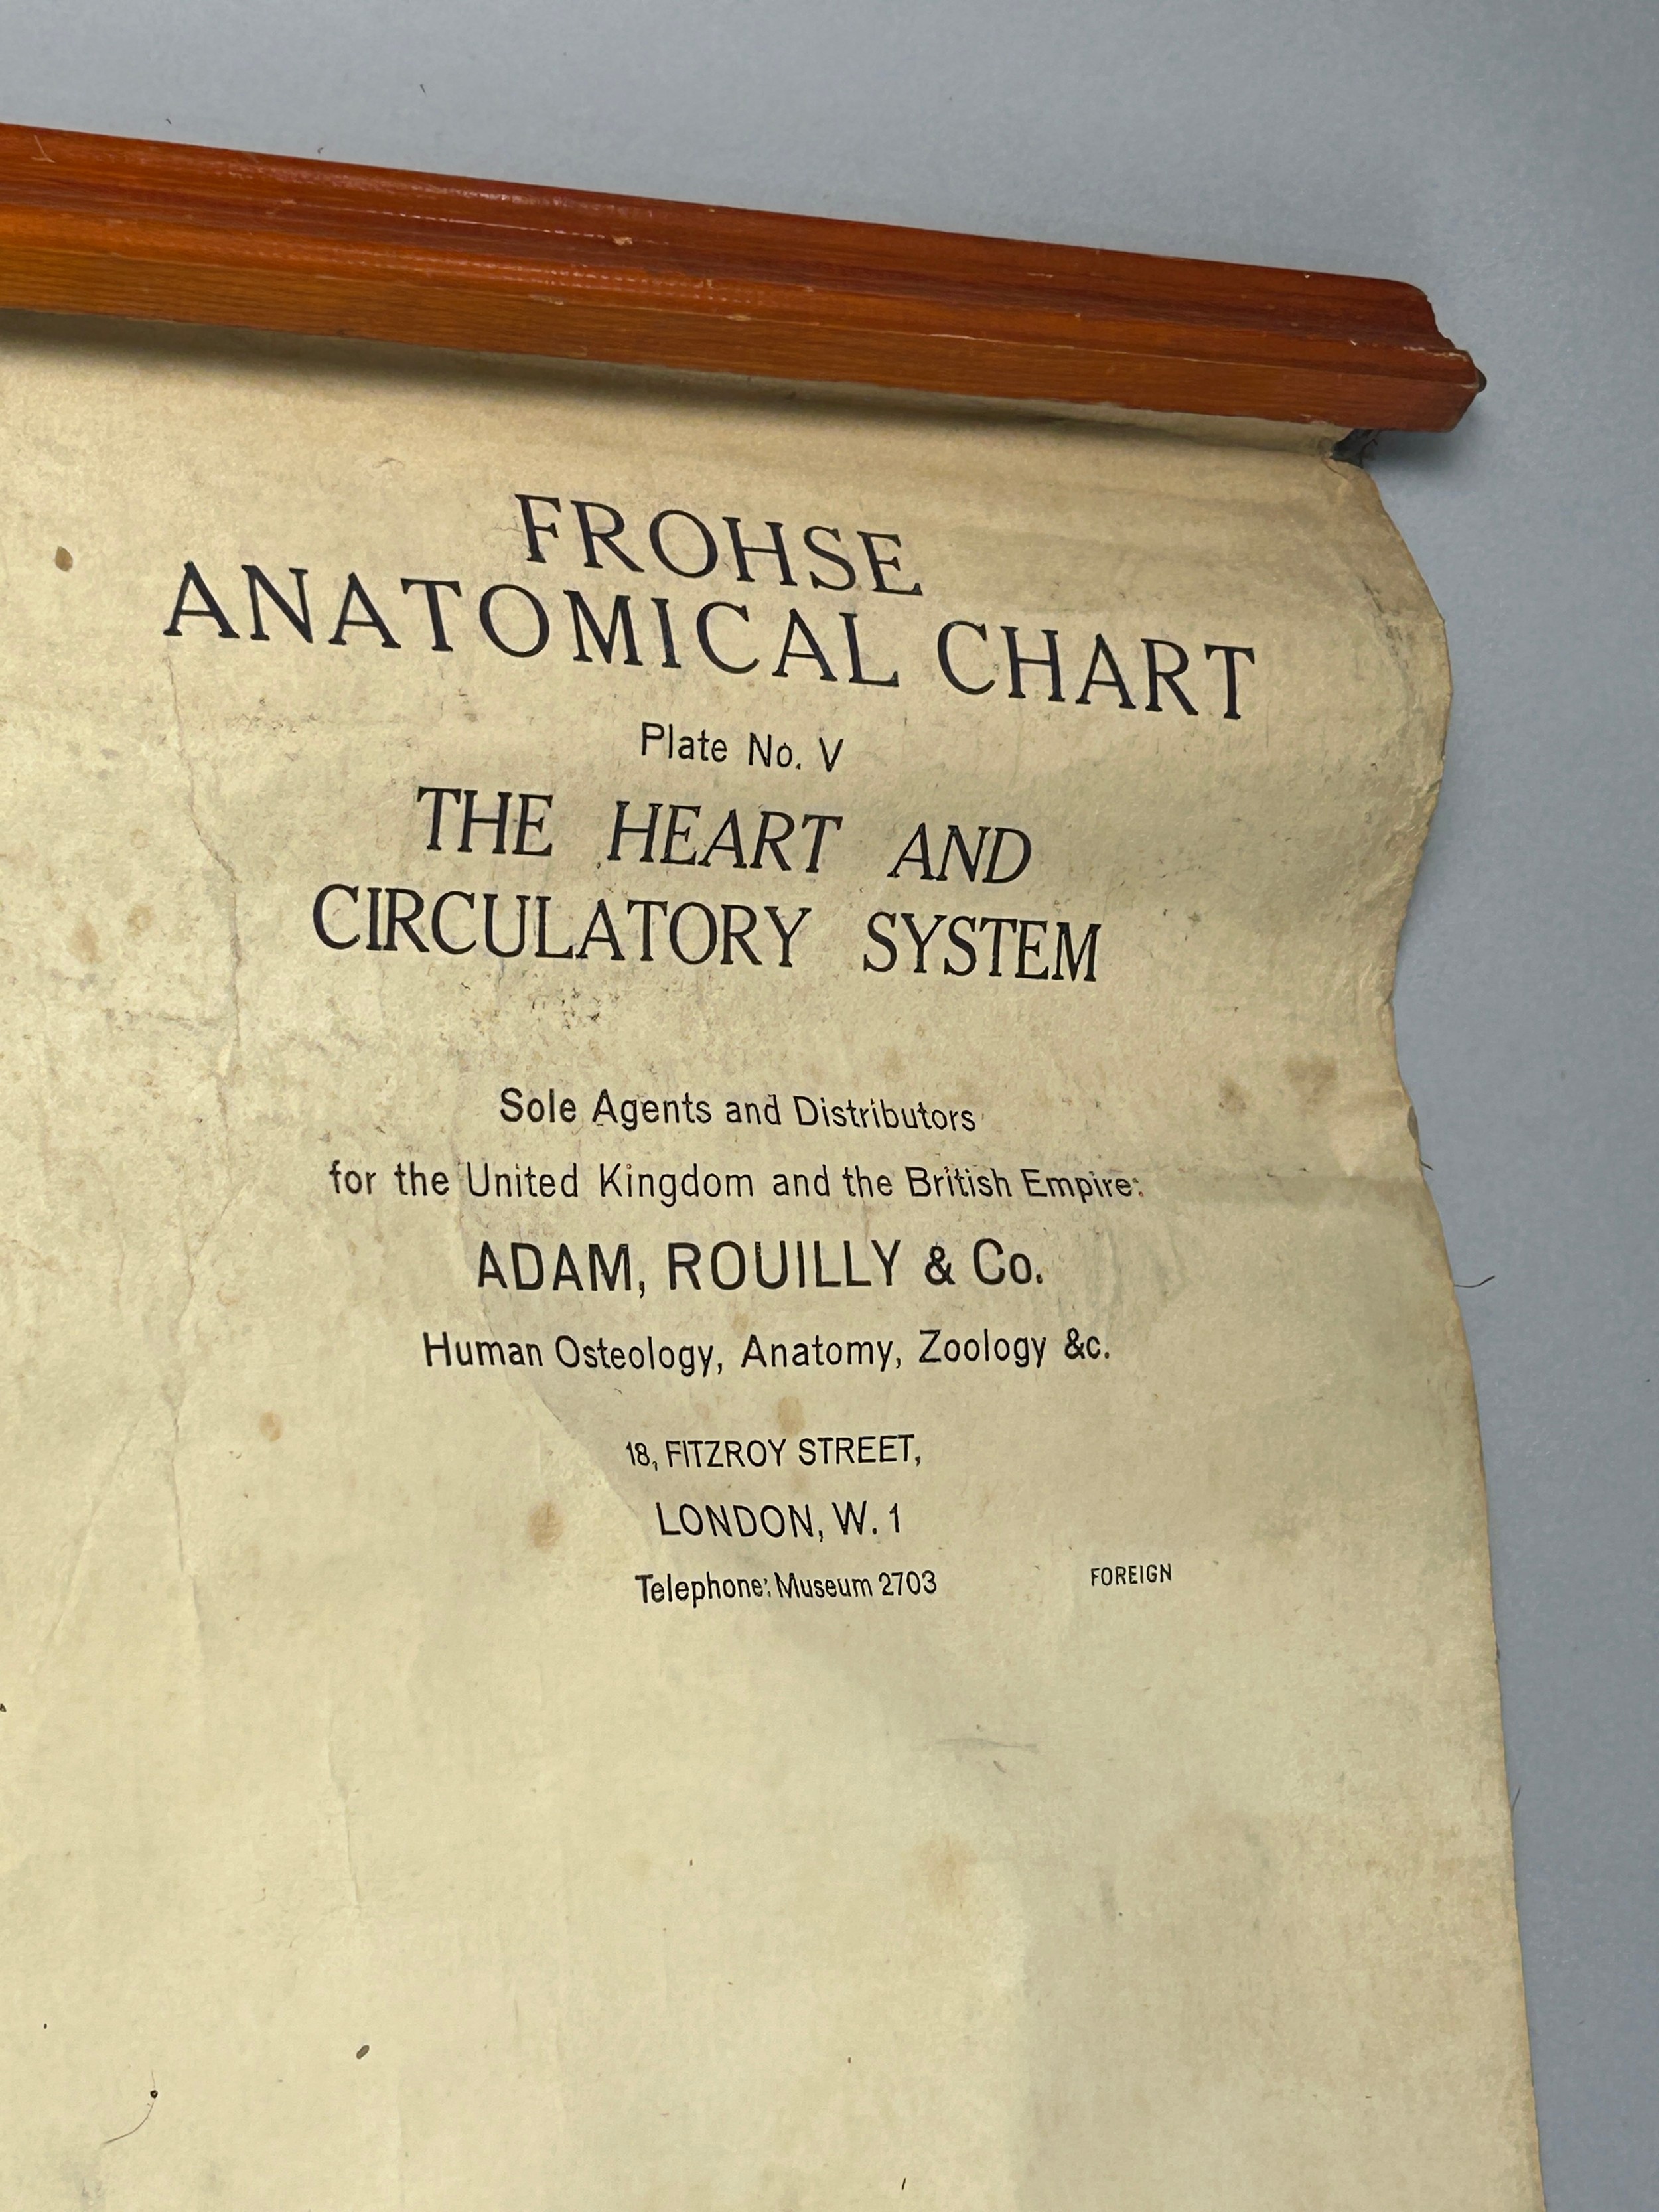 A MEDICAL FROHSE ANATOMICAL CHART 'THE HEART AND CIRCULATORY SYSTEM', hanging scroll by Adam, - Image 5 of 5